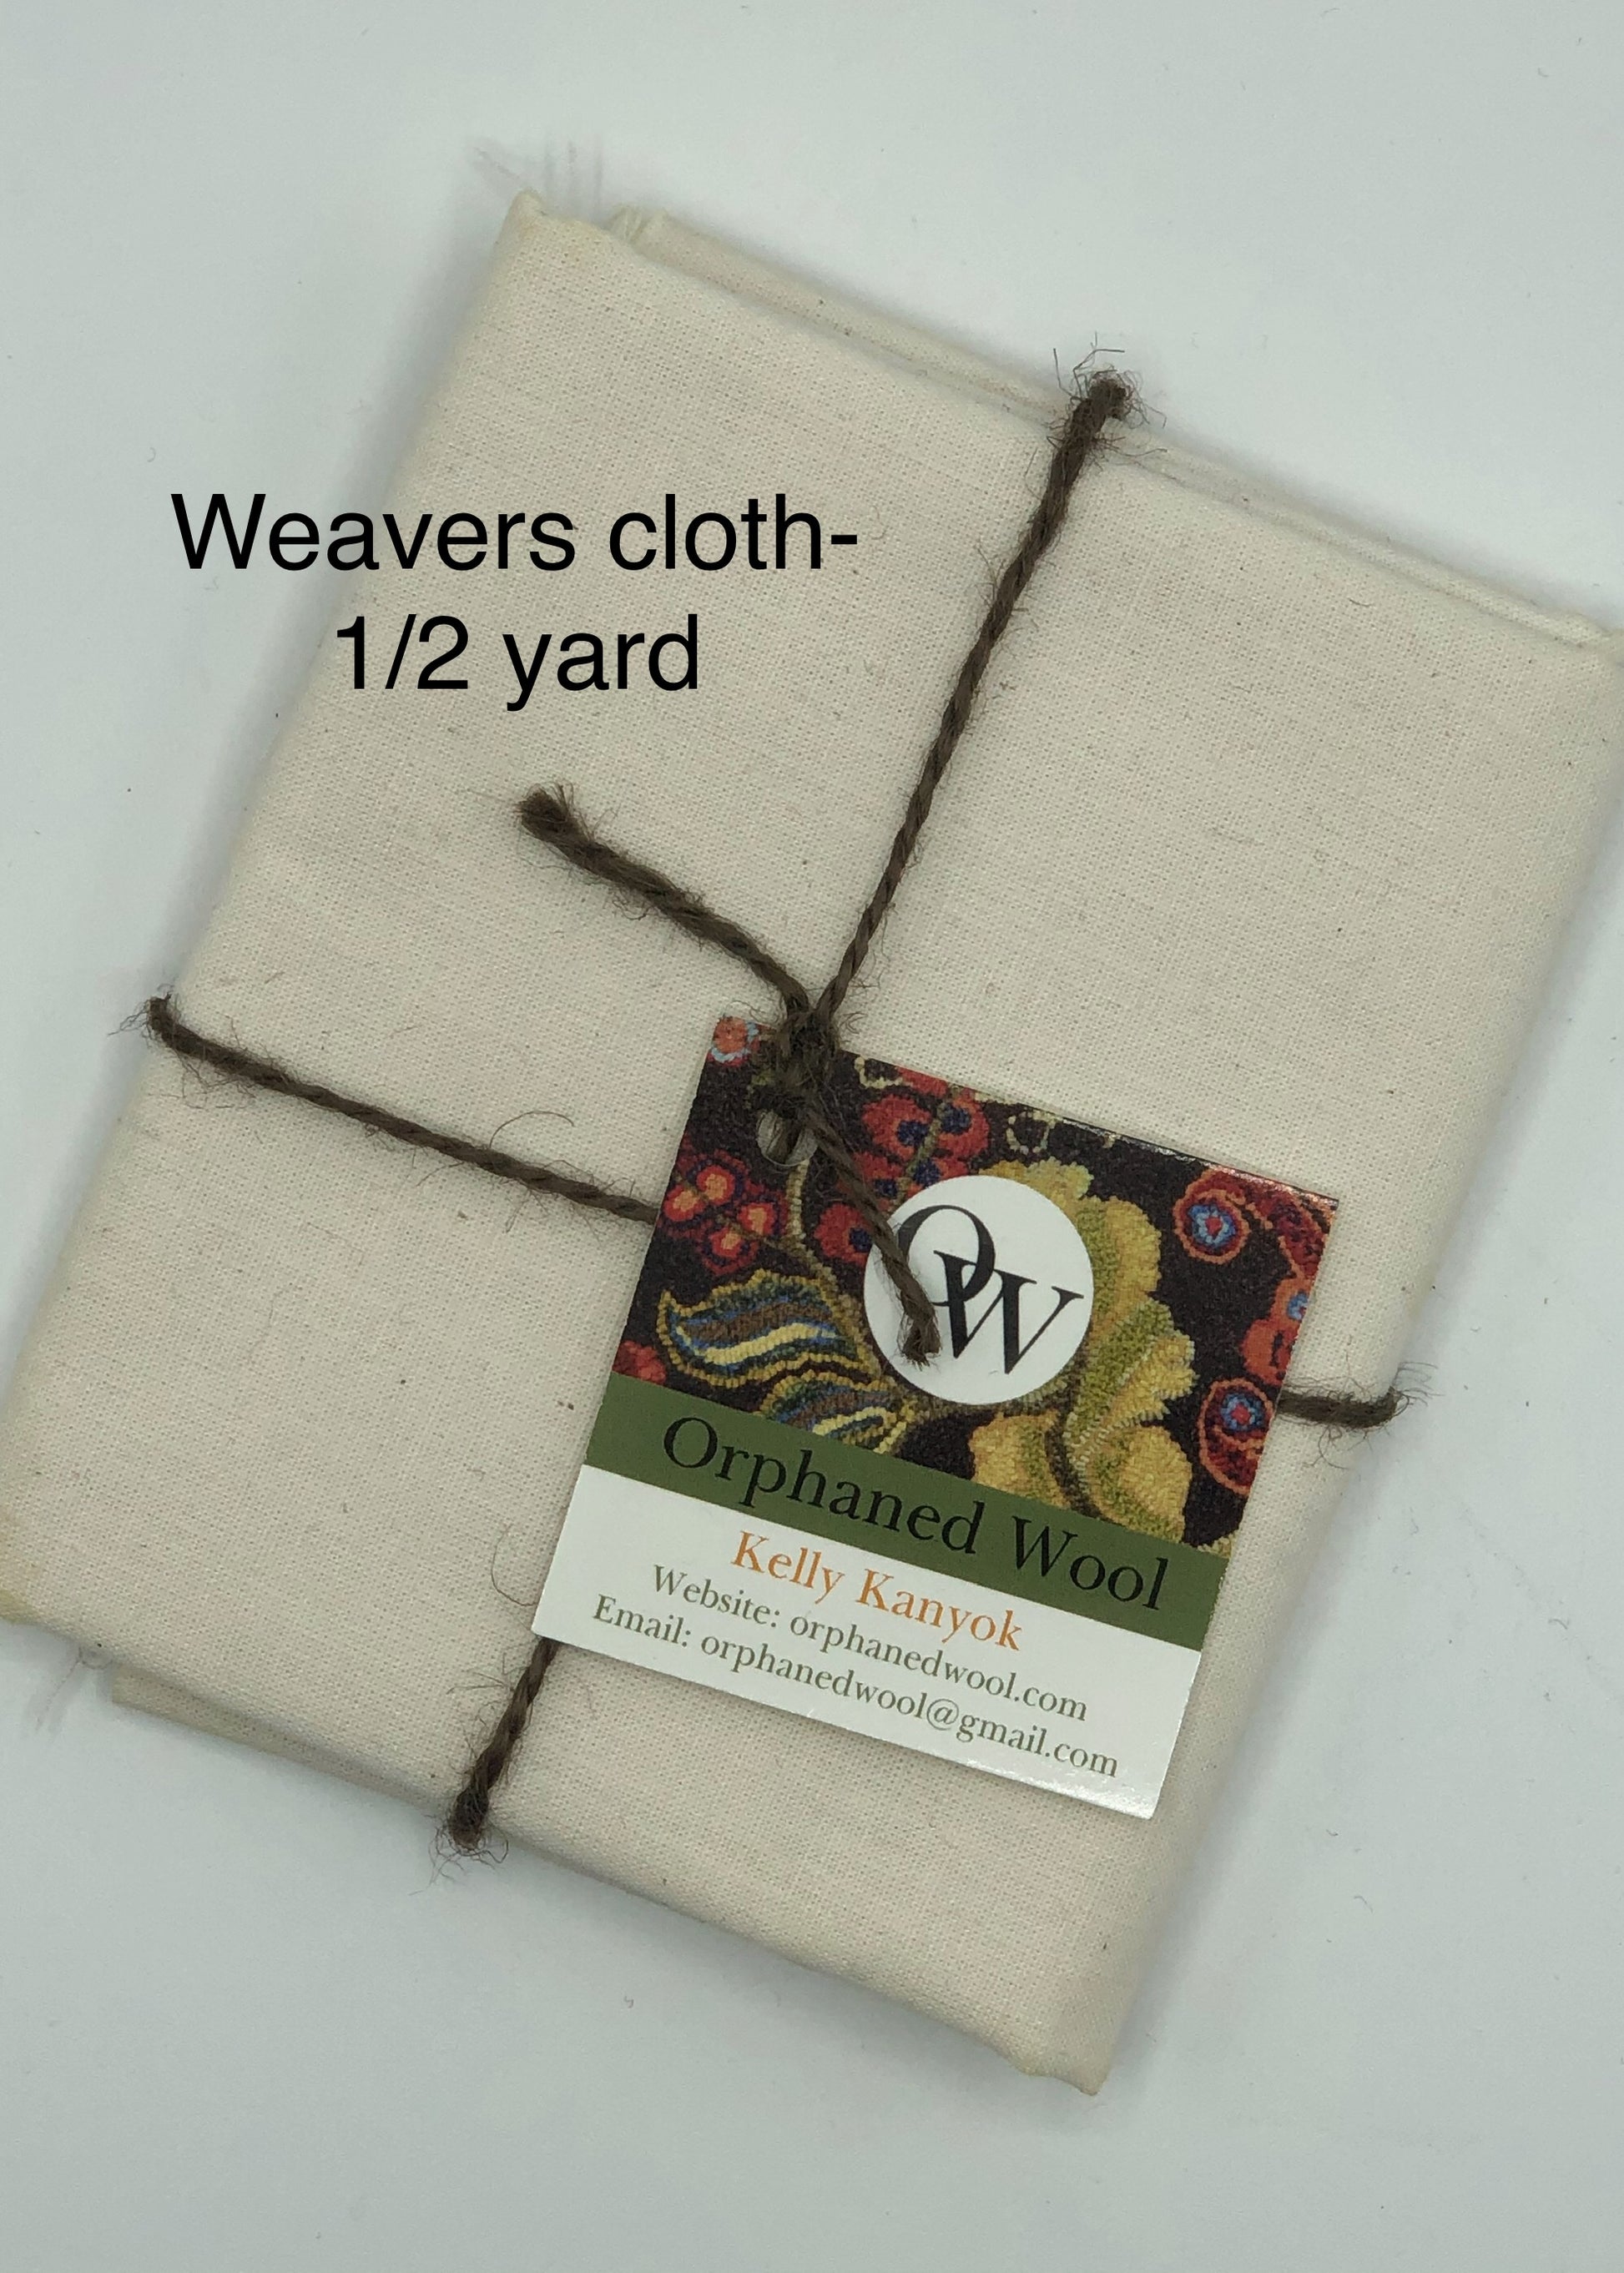 Quality Weaver's Cloth Fabric, from 1/8 to 1 full yard available at Orphaned Wool.